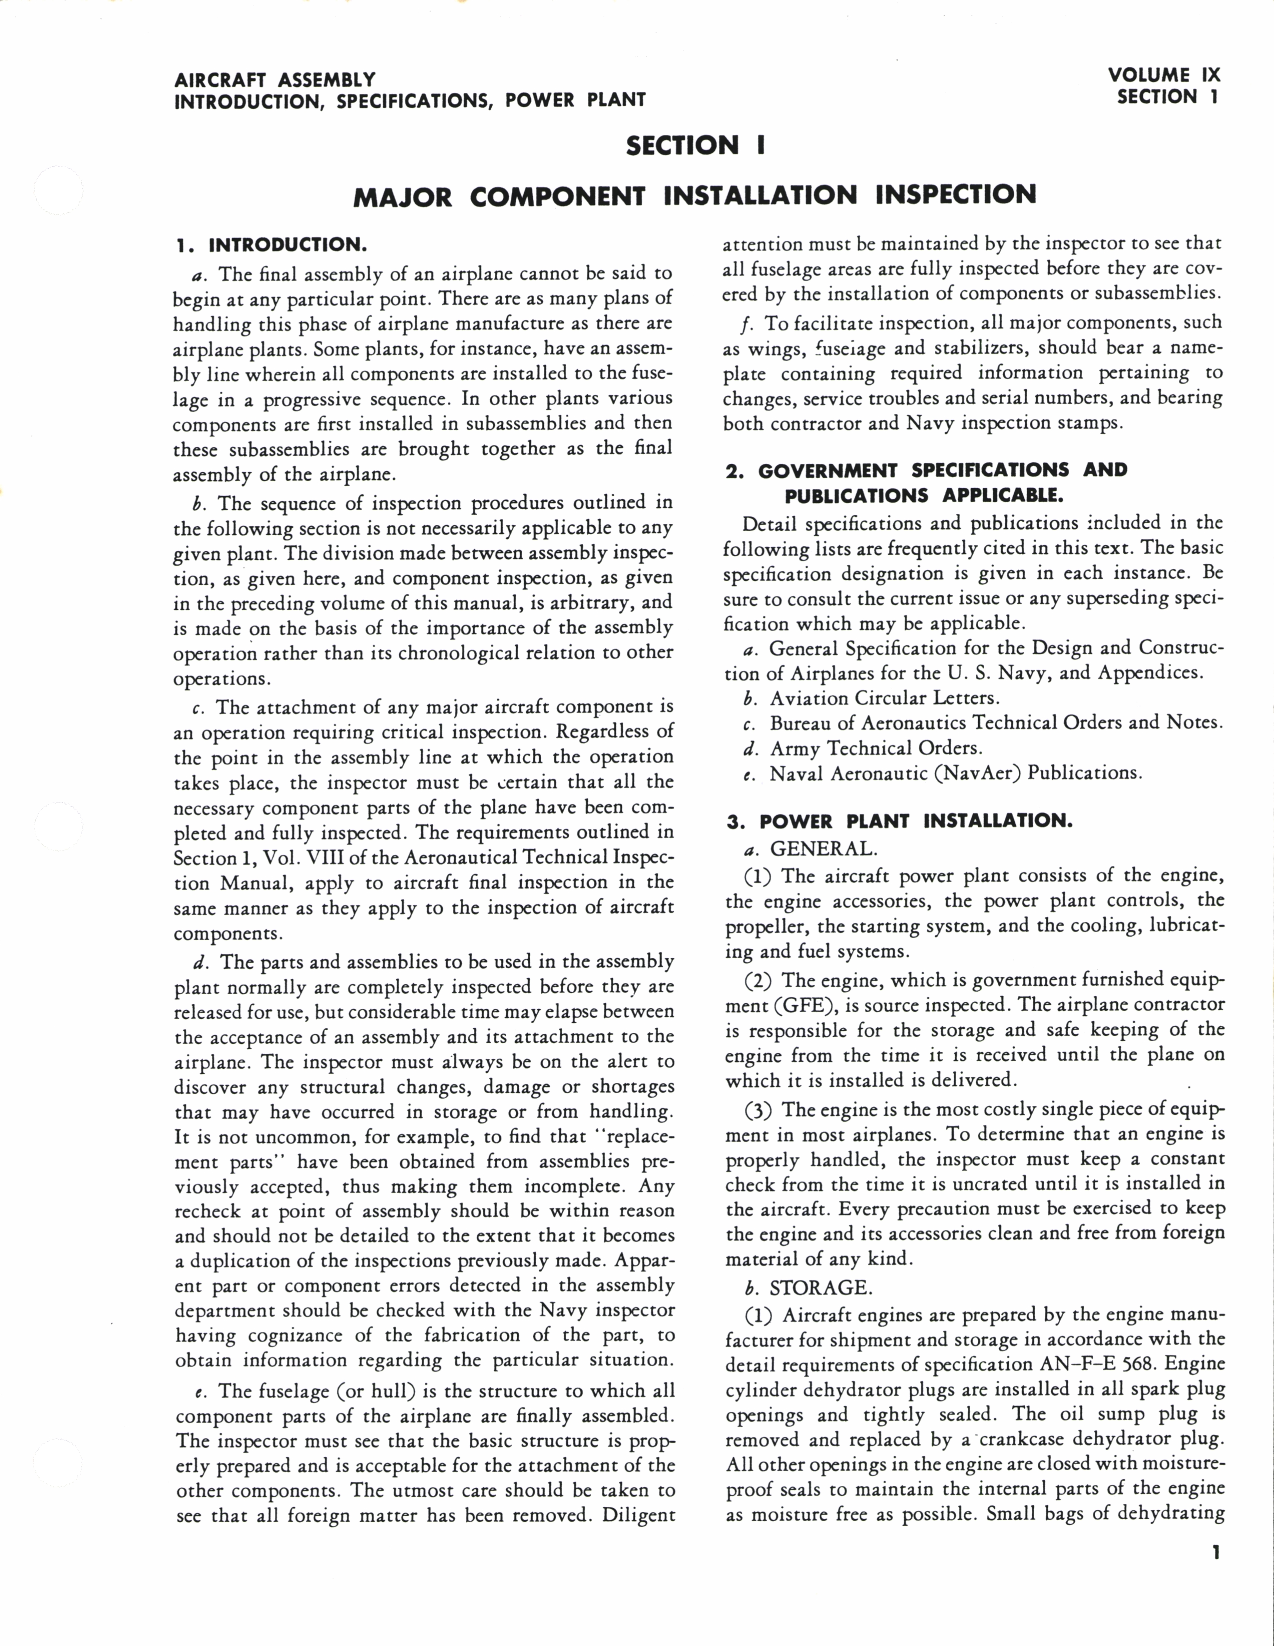 Sample page 5 from AirCorps Library document: Aeronautical Inspection Manual volume 9 for Aircraft Assembly, Pre-Flight and After-Flight Inspection